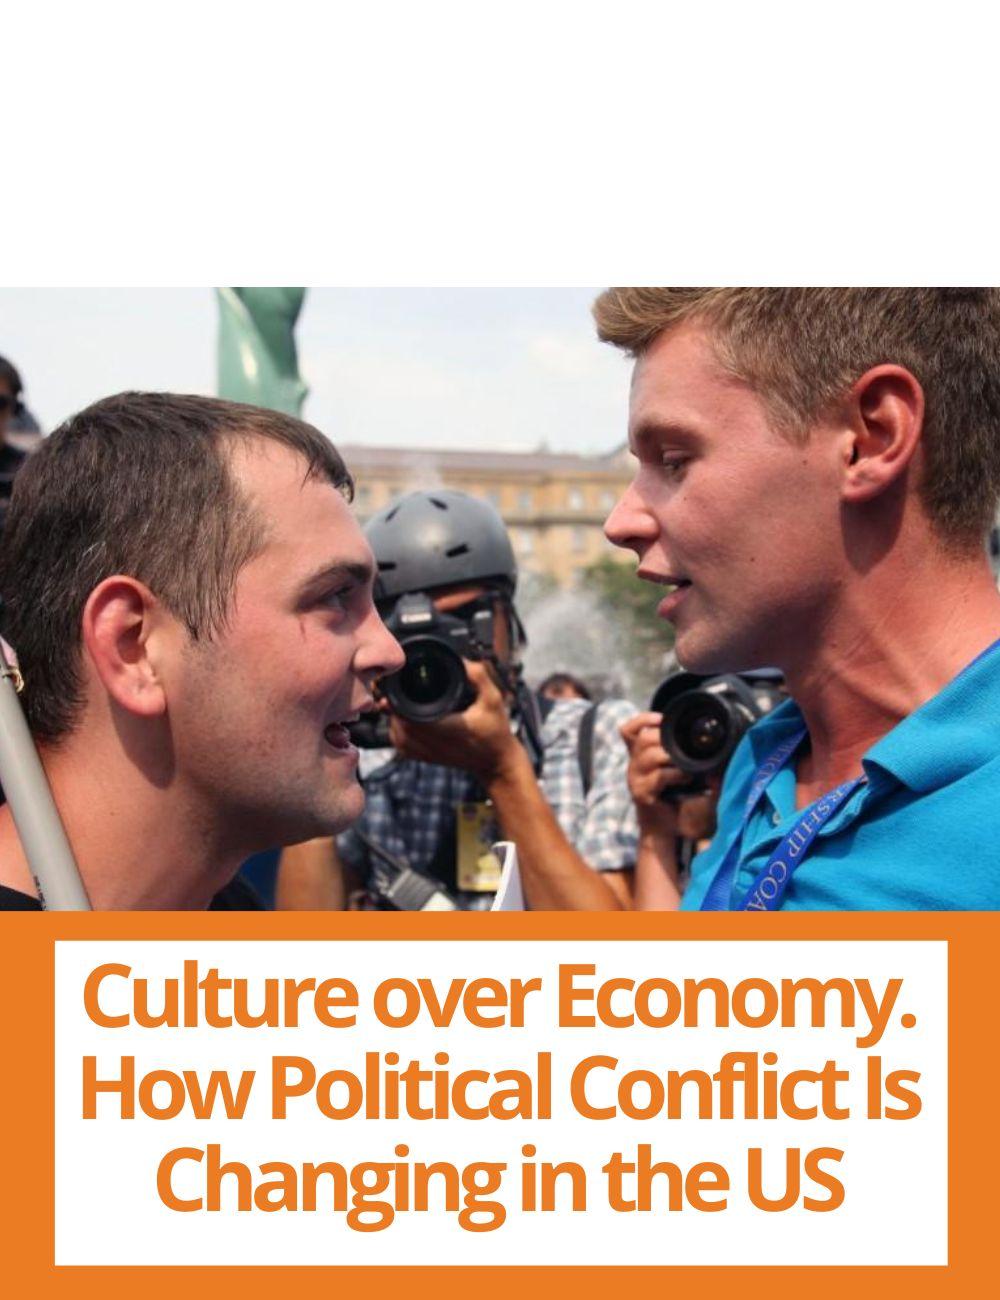 Link to related stories. Image: two men discussing. Story headline: Culture over Economy. How Political Conflict Is Changing in the US